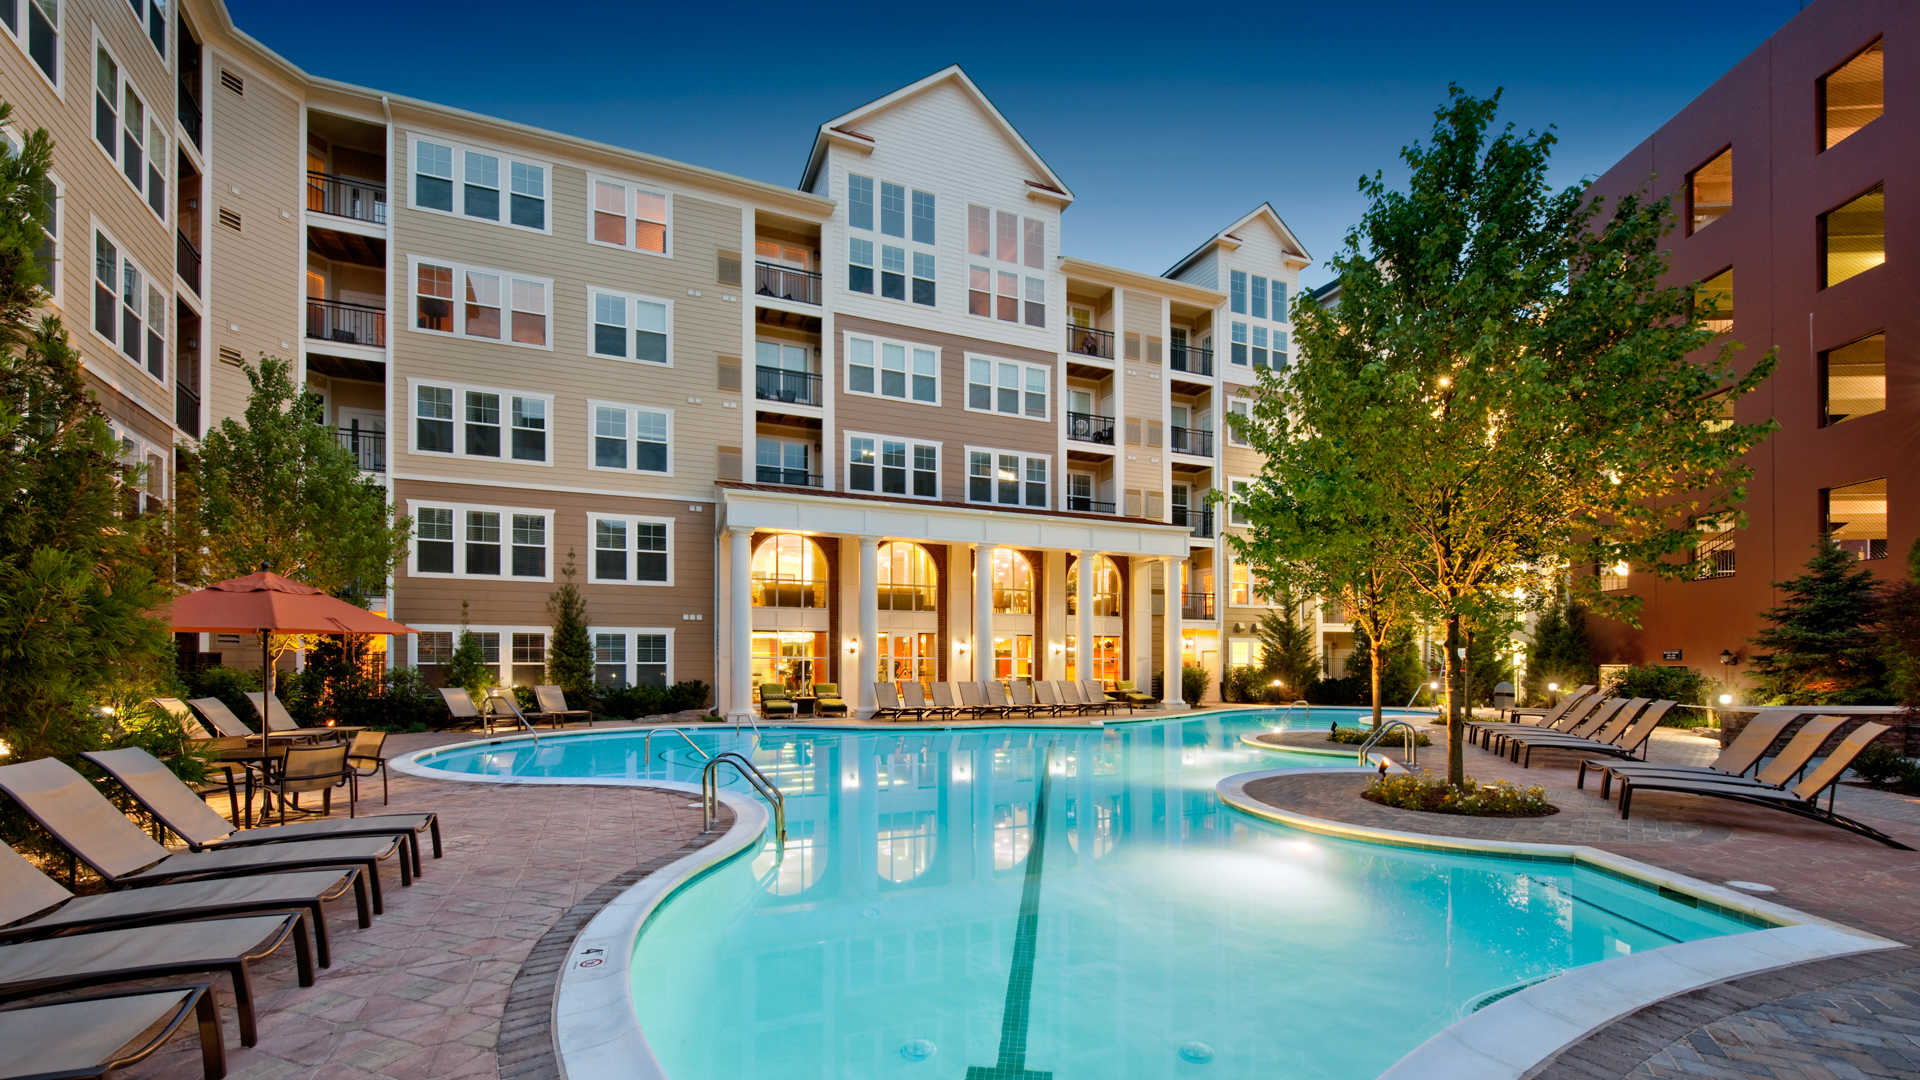 westchester-rockville-station-apartments-swimming-pool.jpeg